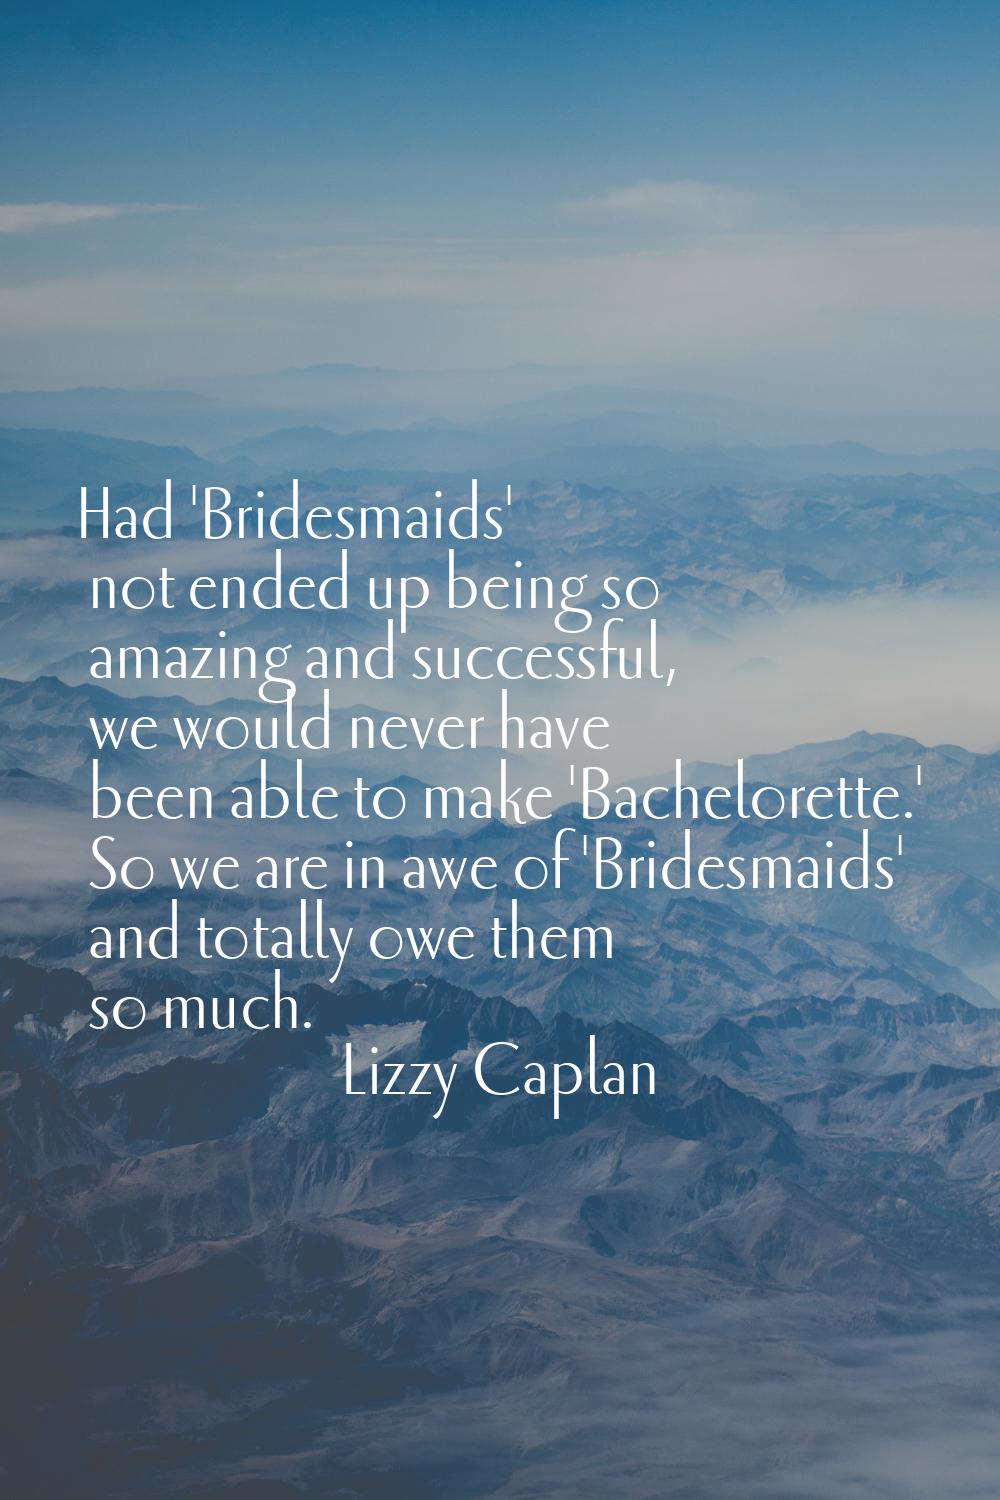 Had 'Bridesmaids' not ended up being so amazing and successful, we would never have been able to ma